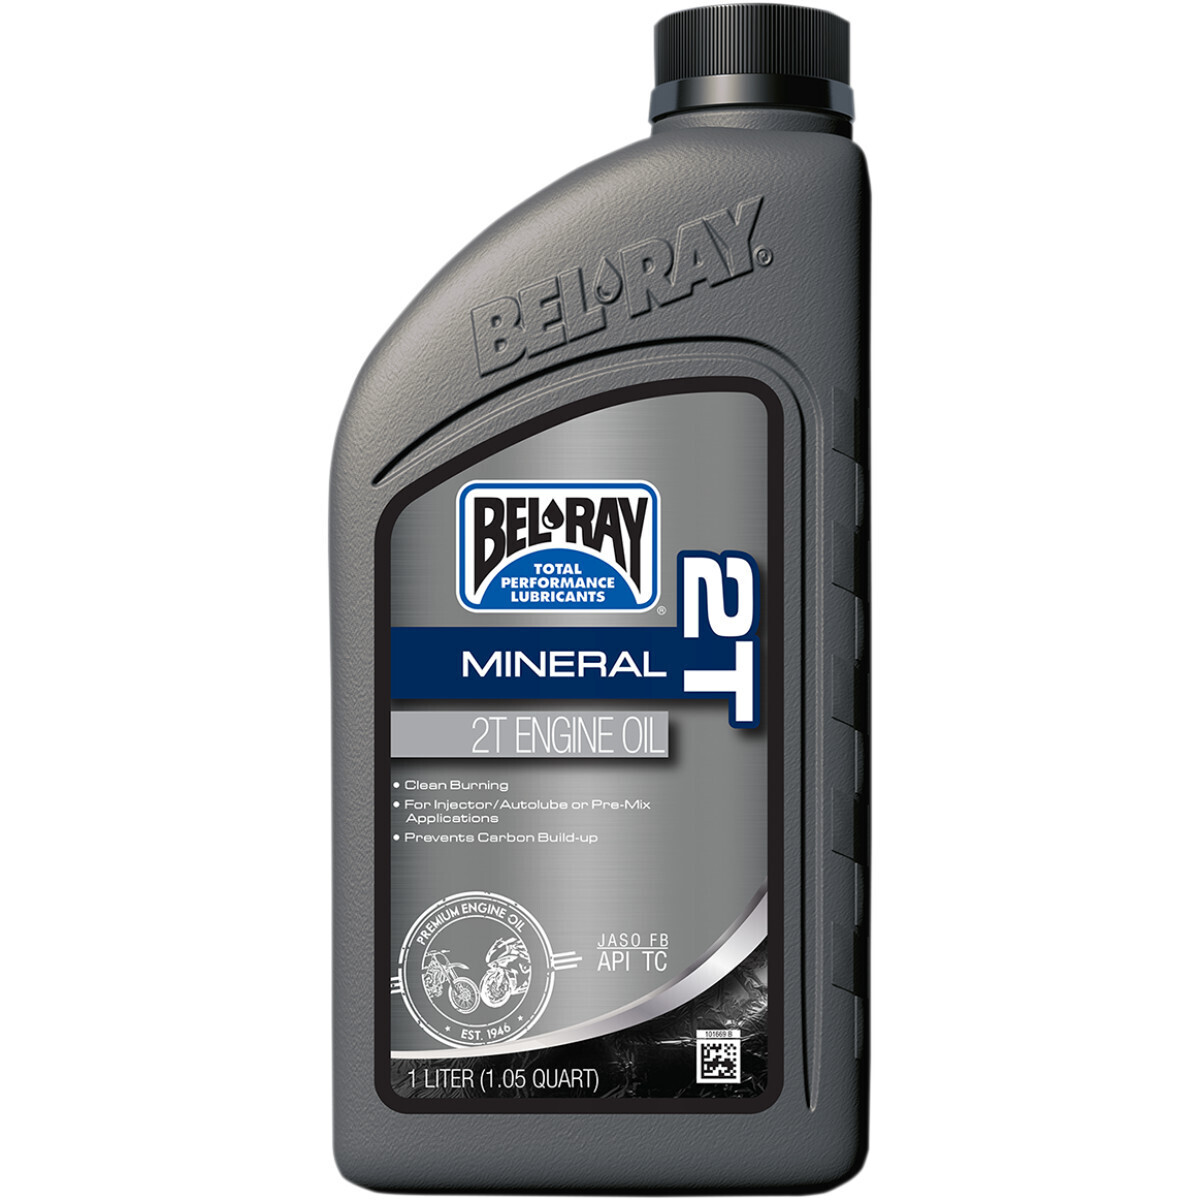 BEL-RAY
MINERAL 2T ENGINE OIL 1 LITER